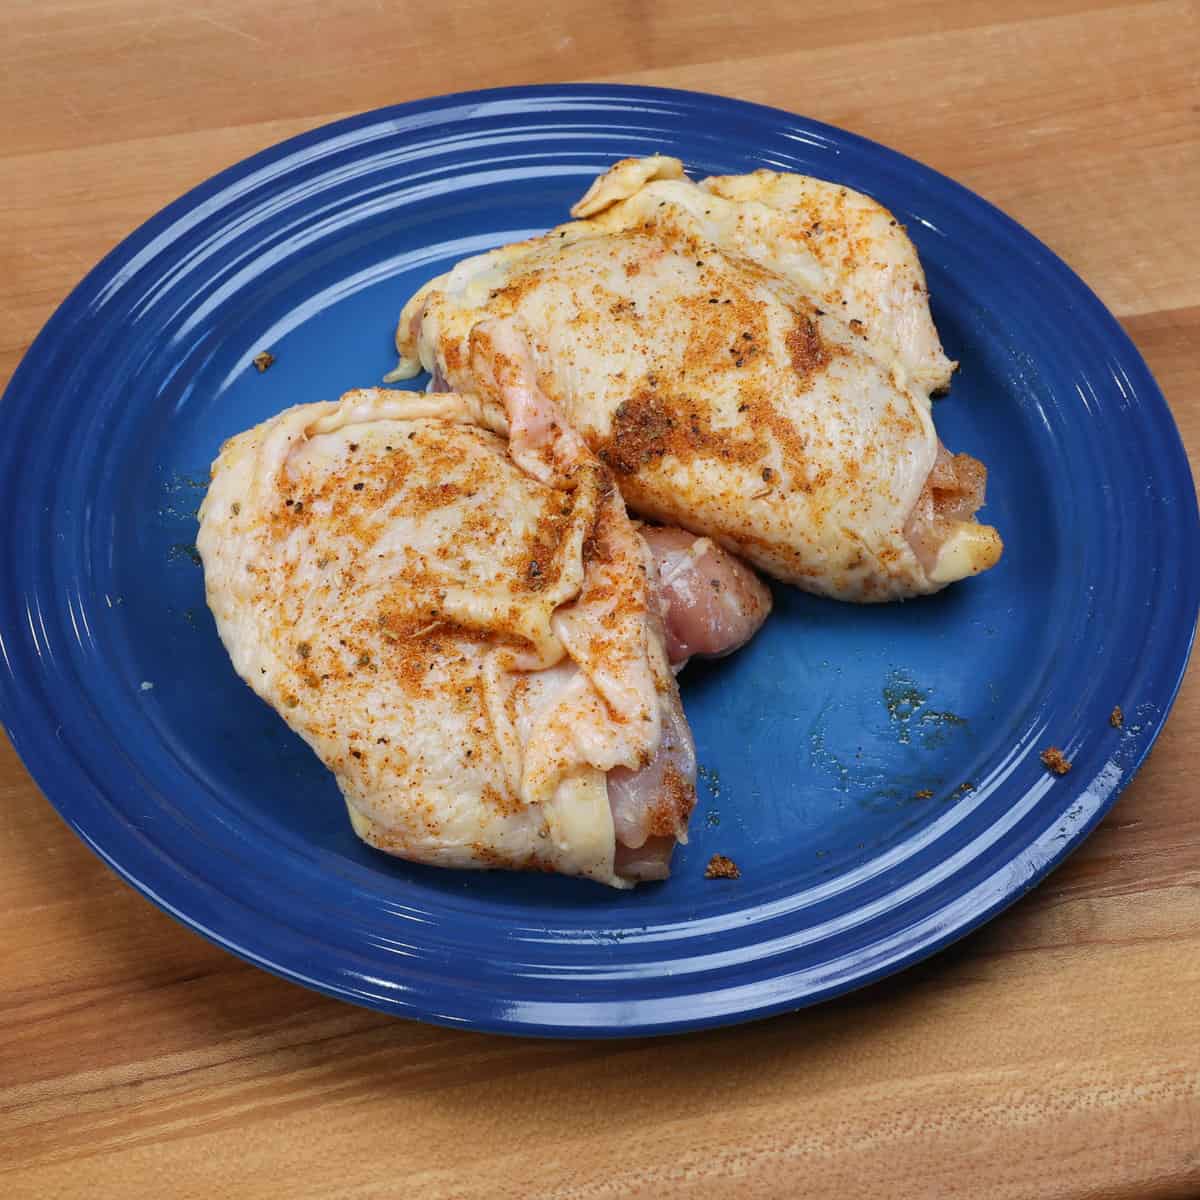 two chicken thighs coated in seasonings on a blue plate.